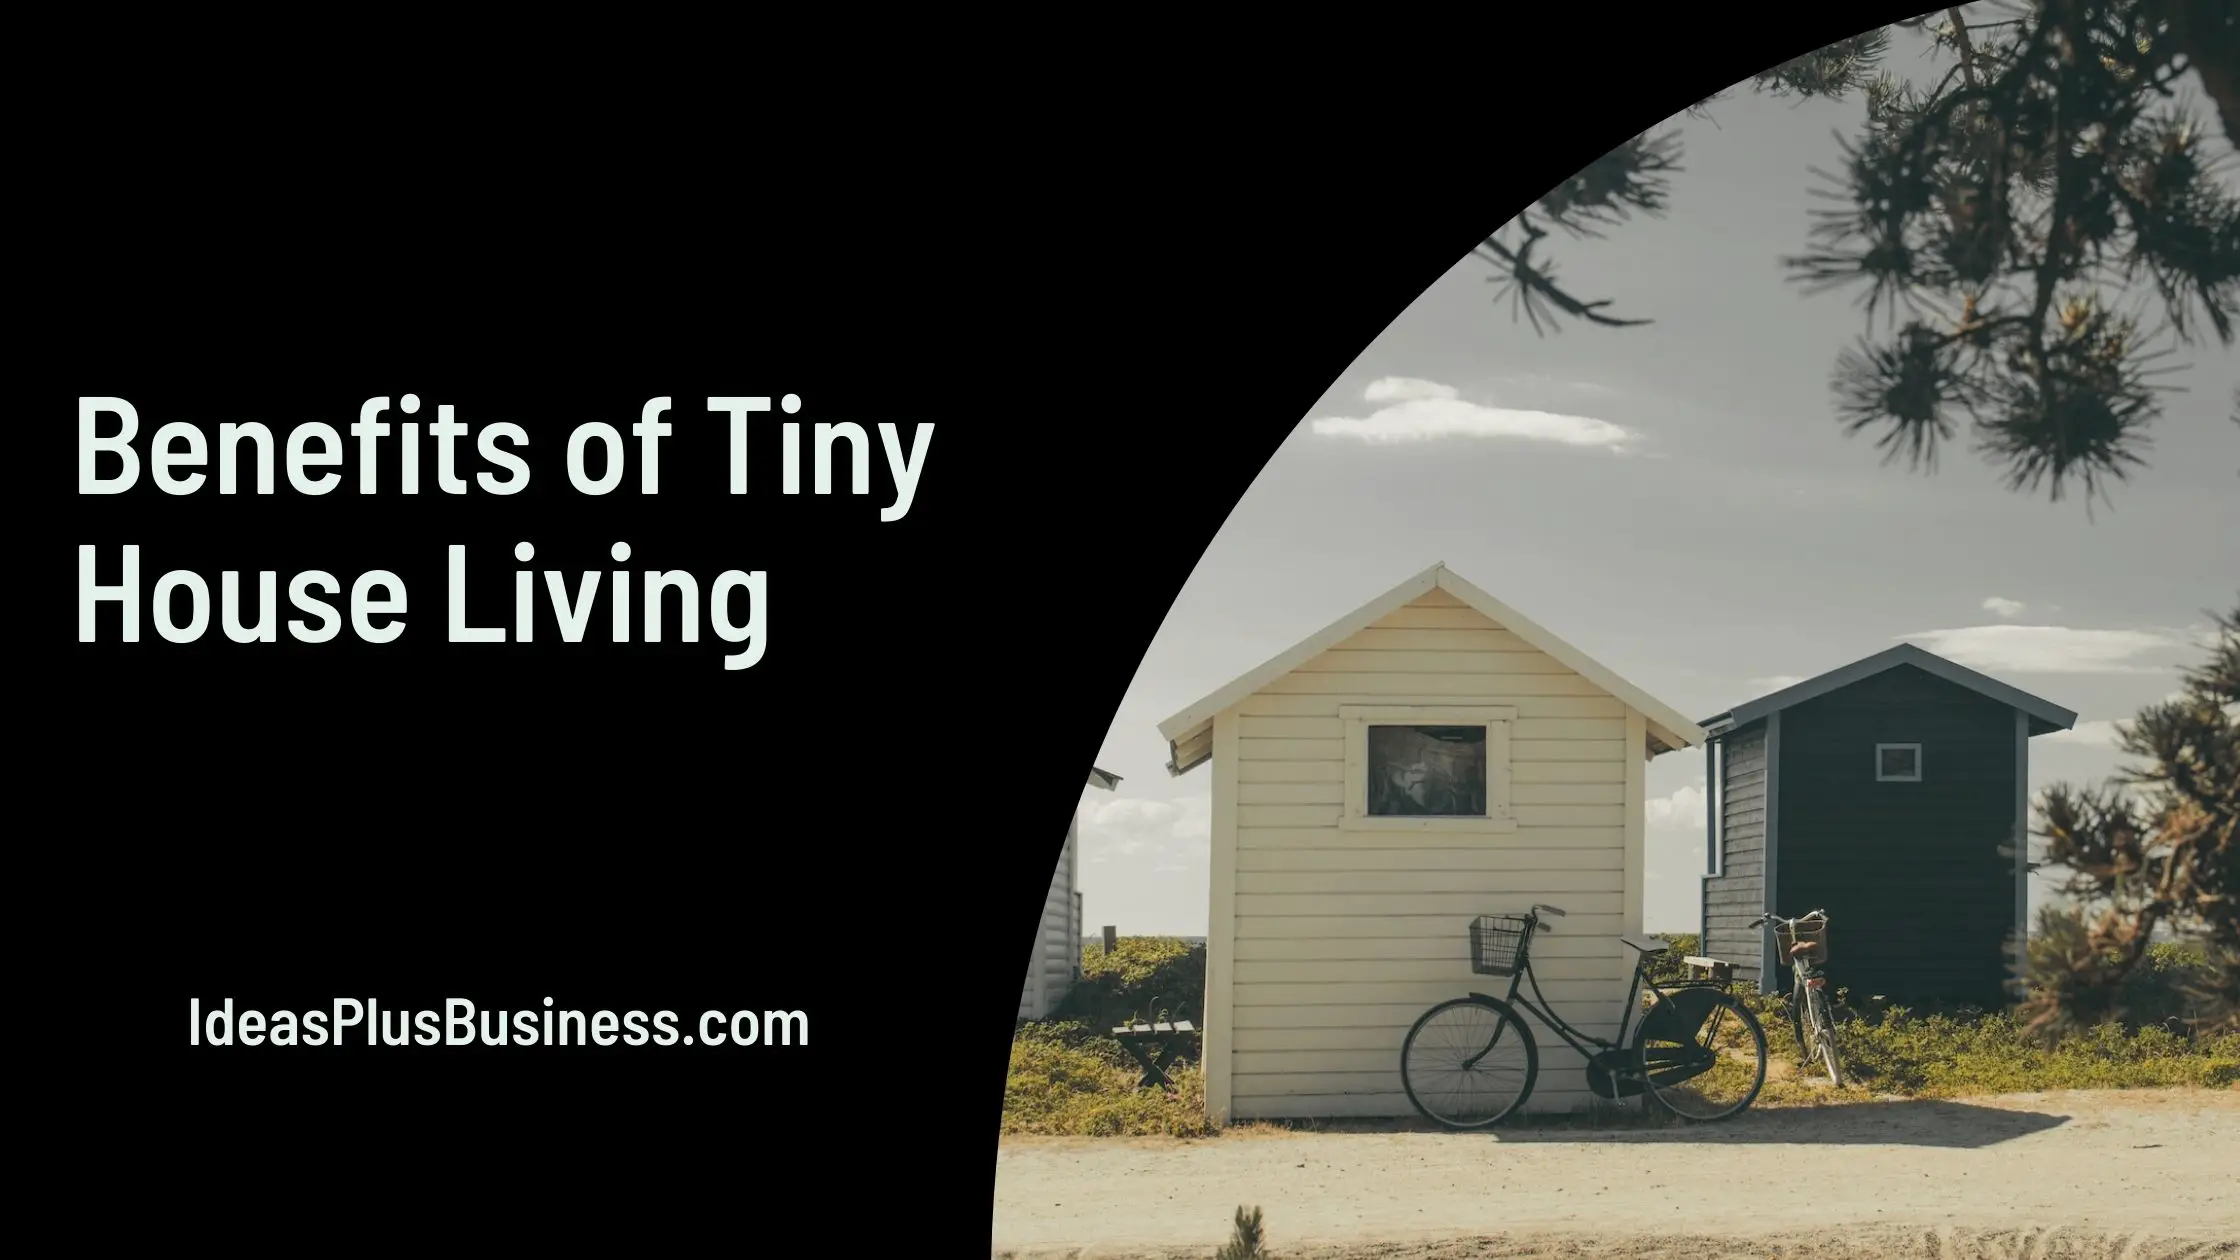 18 Great Benefits of Tiny House Living